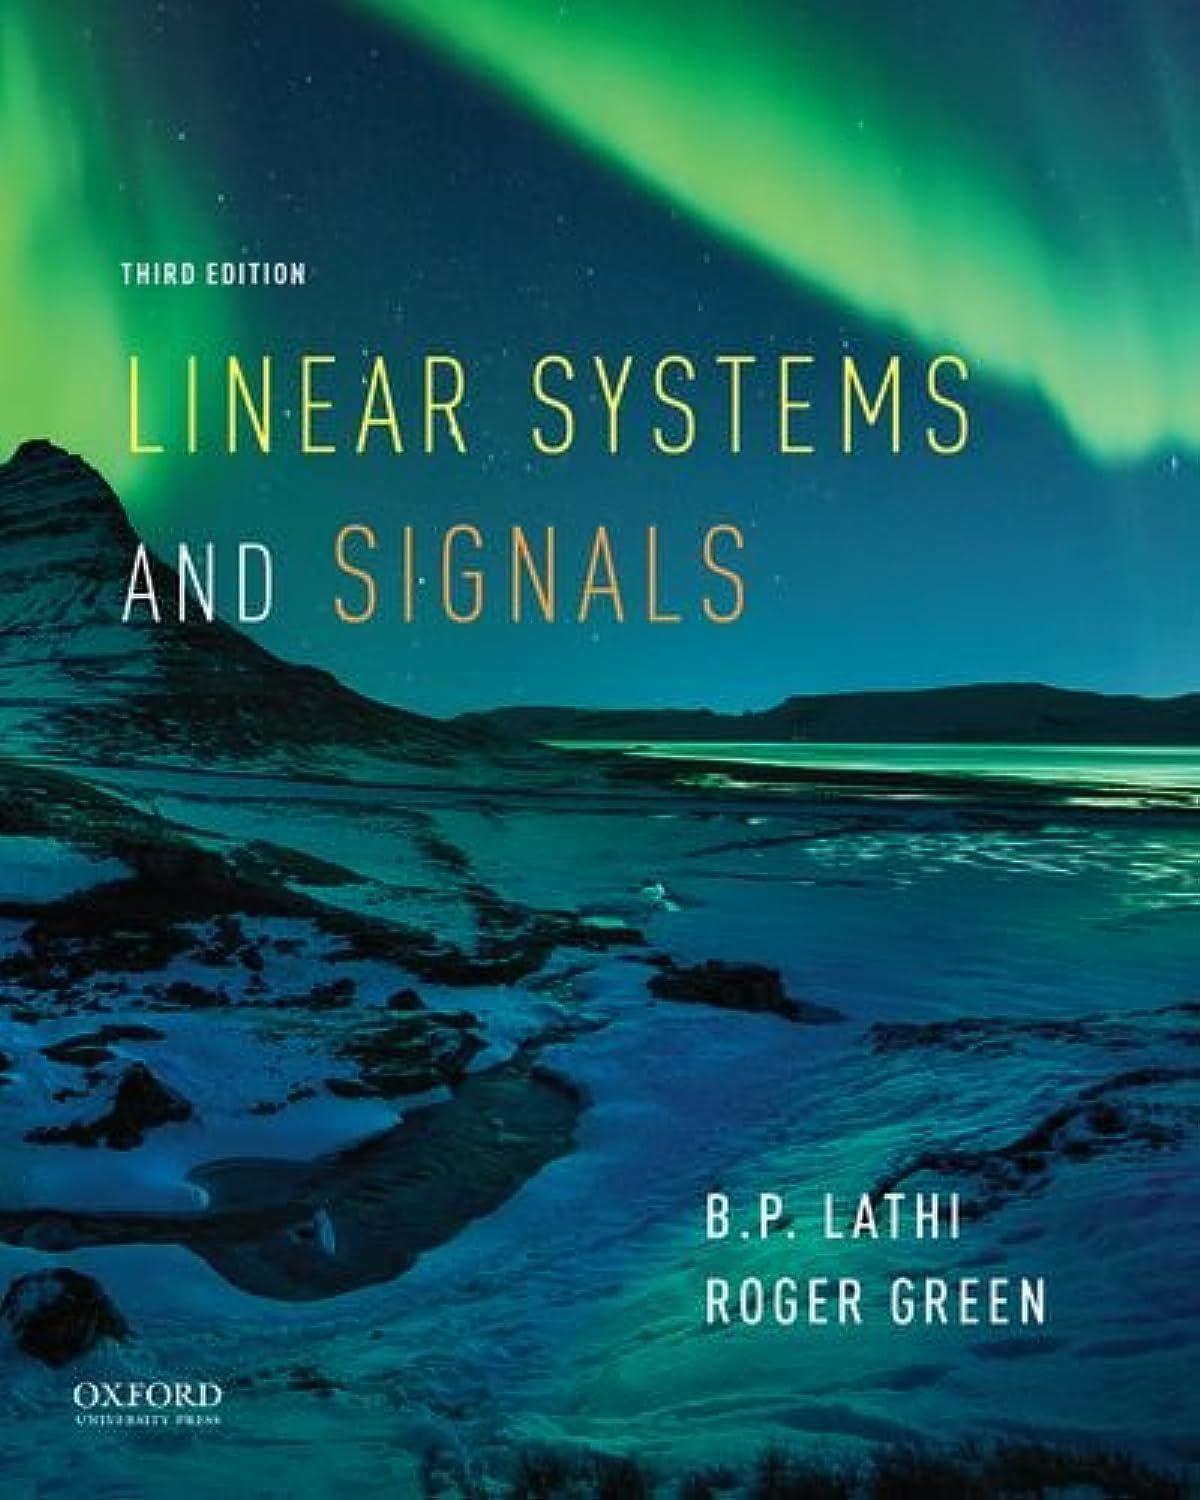 linear systems and signals 3rd edition b.p. lathi, roger green 0190200170, 978-0190200176